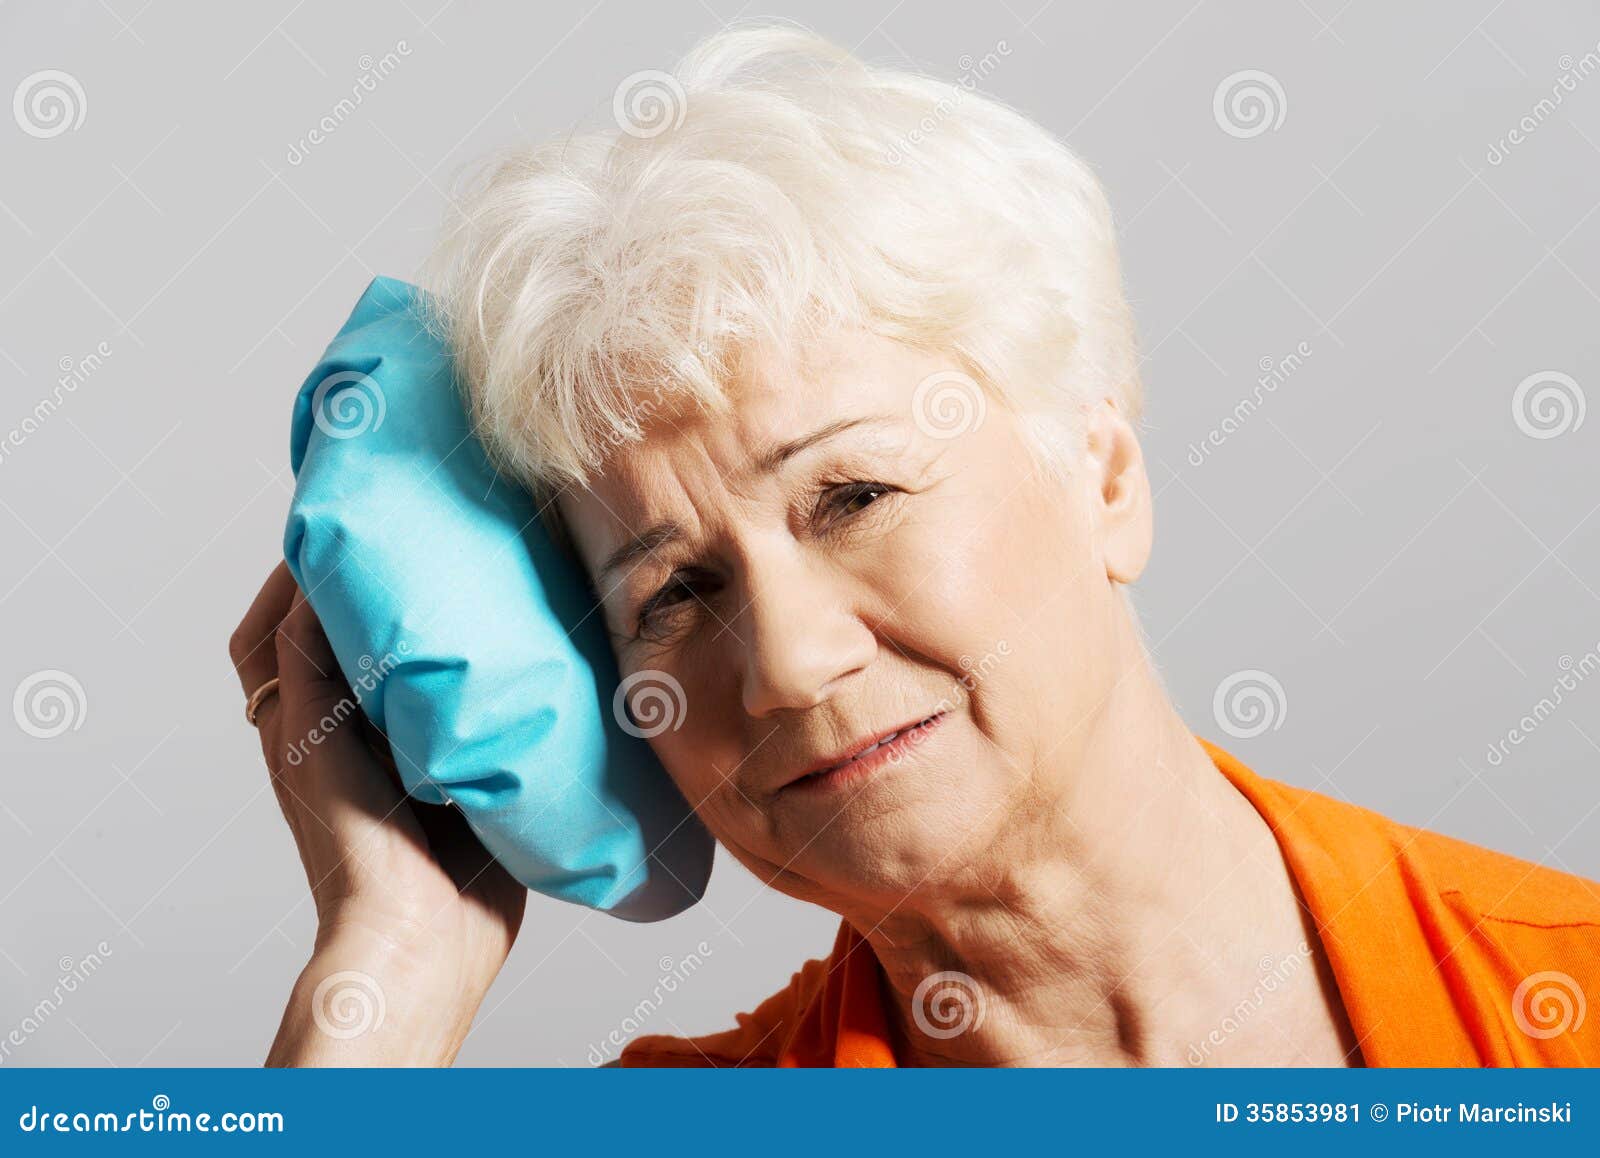 An Old Lady With Ice Bag By Her Head Stock Image Im